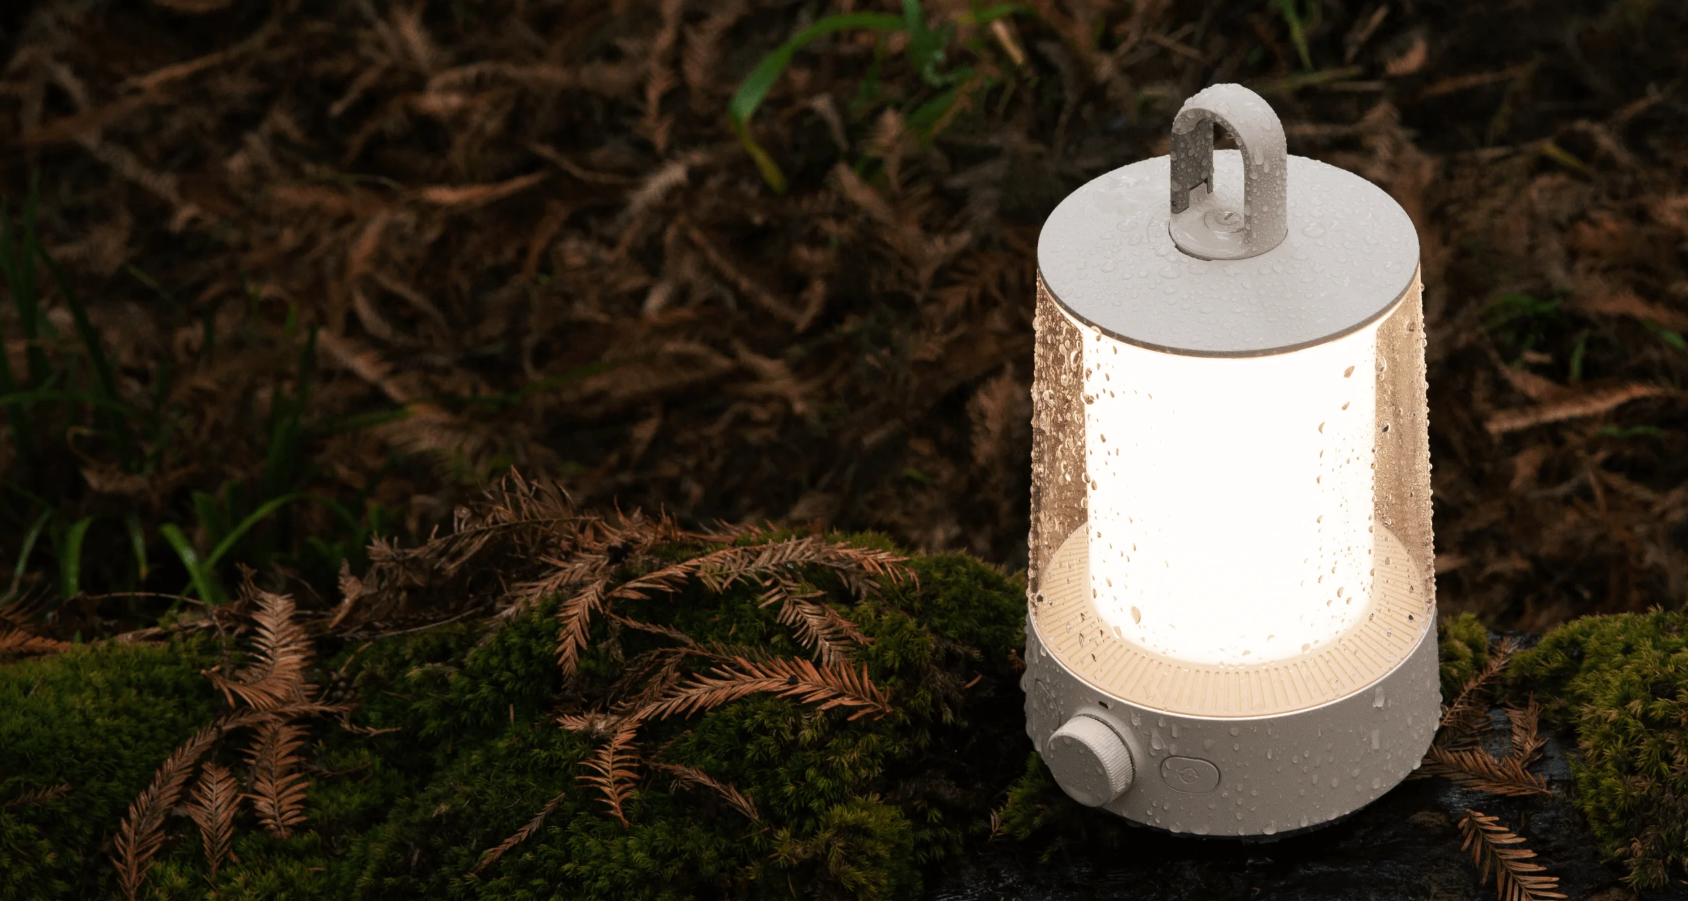 Xiaomi_multi-functional_camping_lantern_IP54_rating_dust_and_splash_resistance_design_sold_by_Technomobi